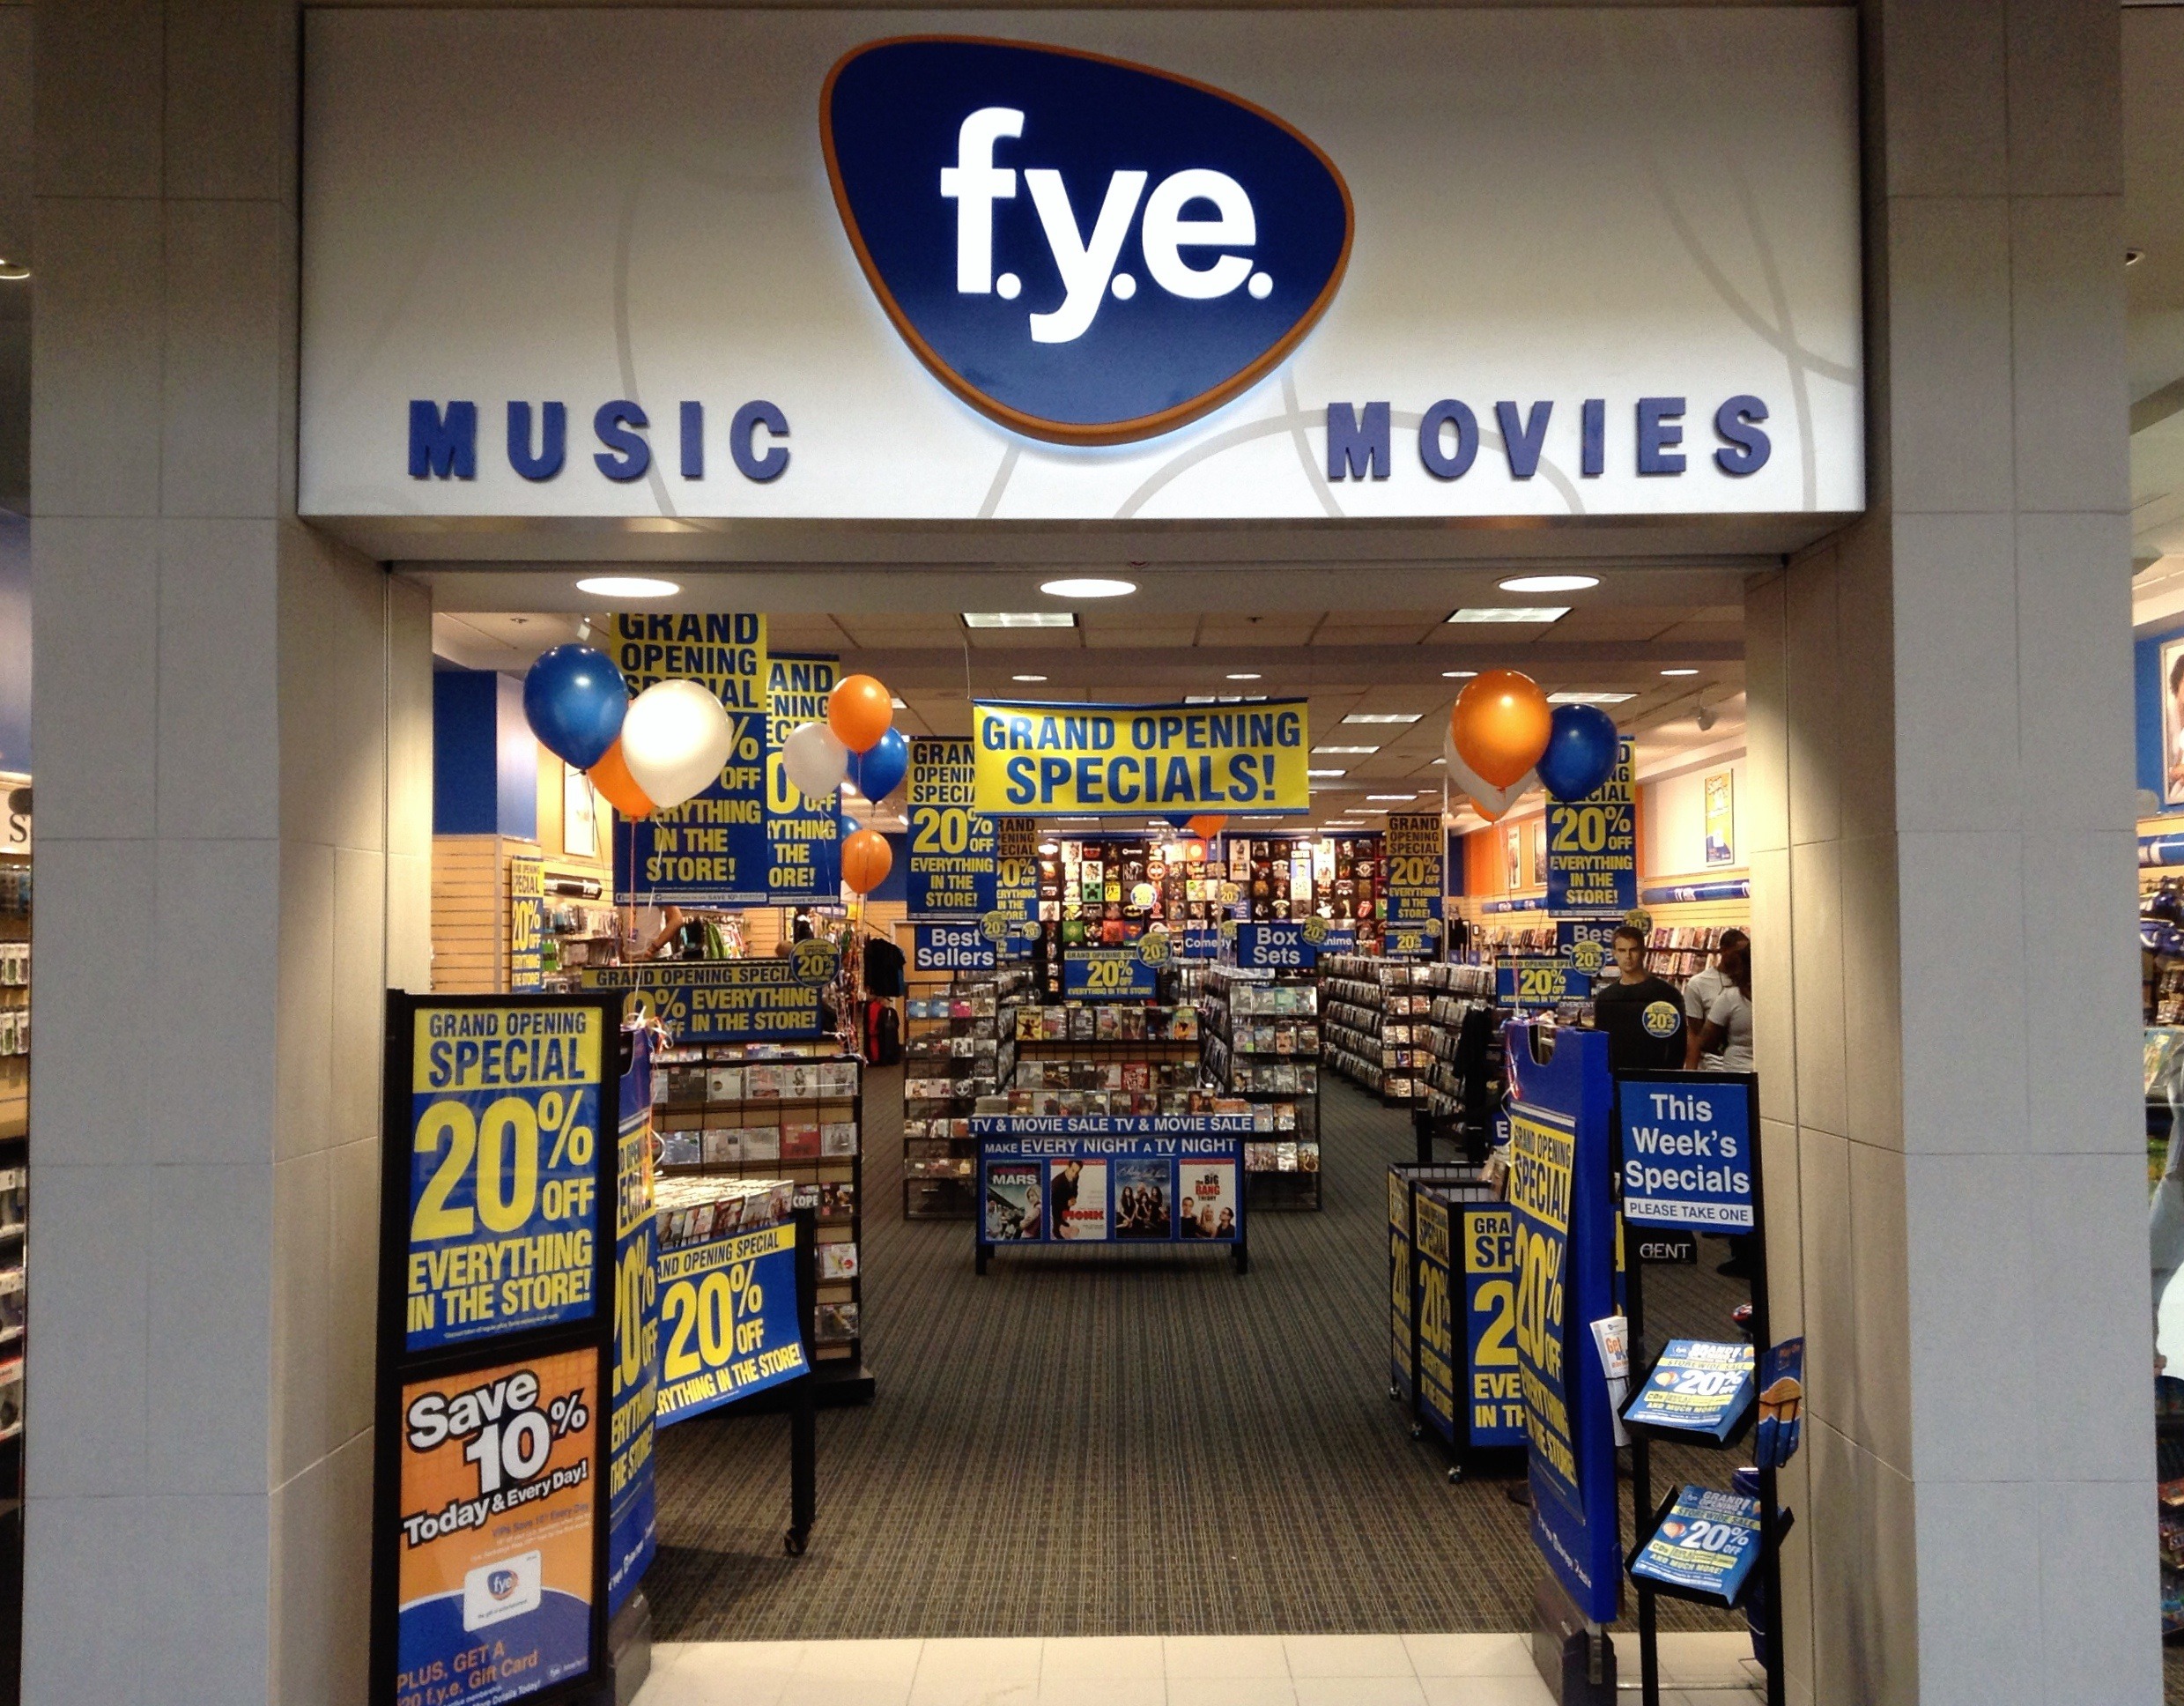 FYE Retail Stores Lost $50.7 Million in Fiscal Year 